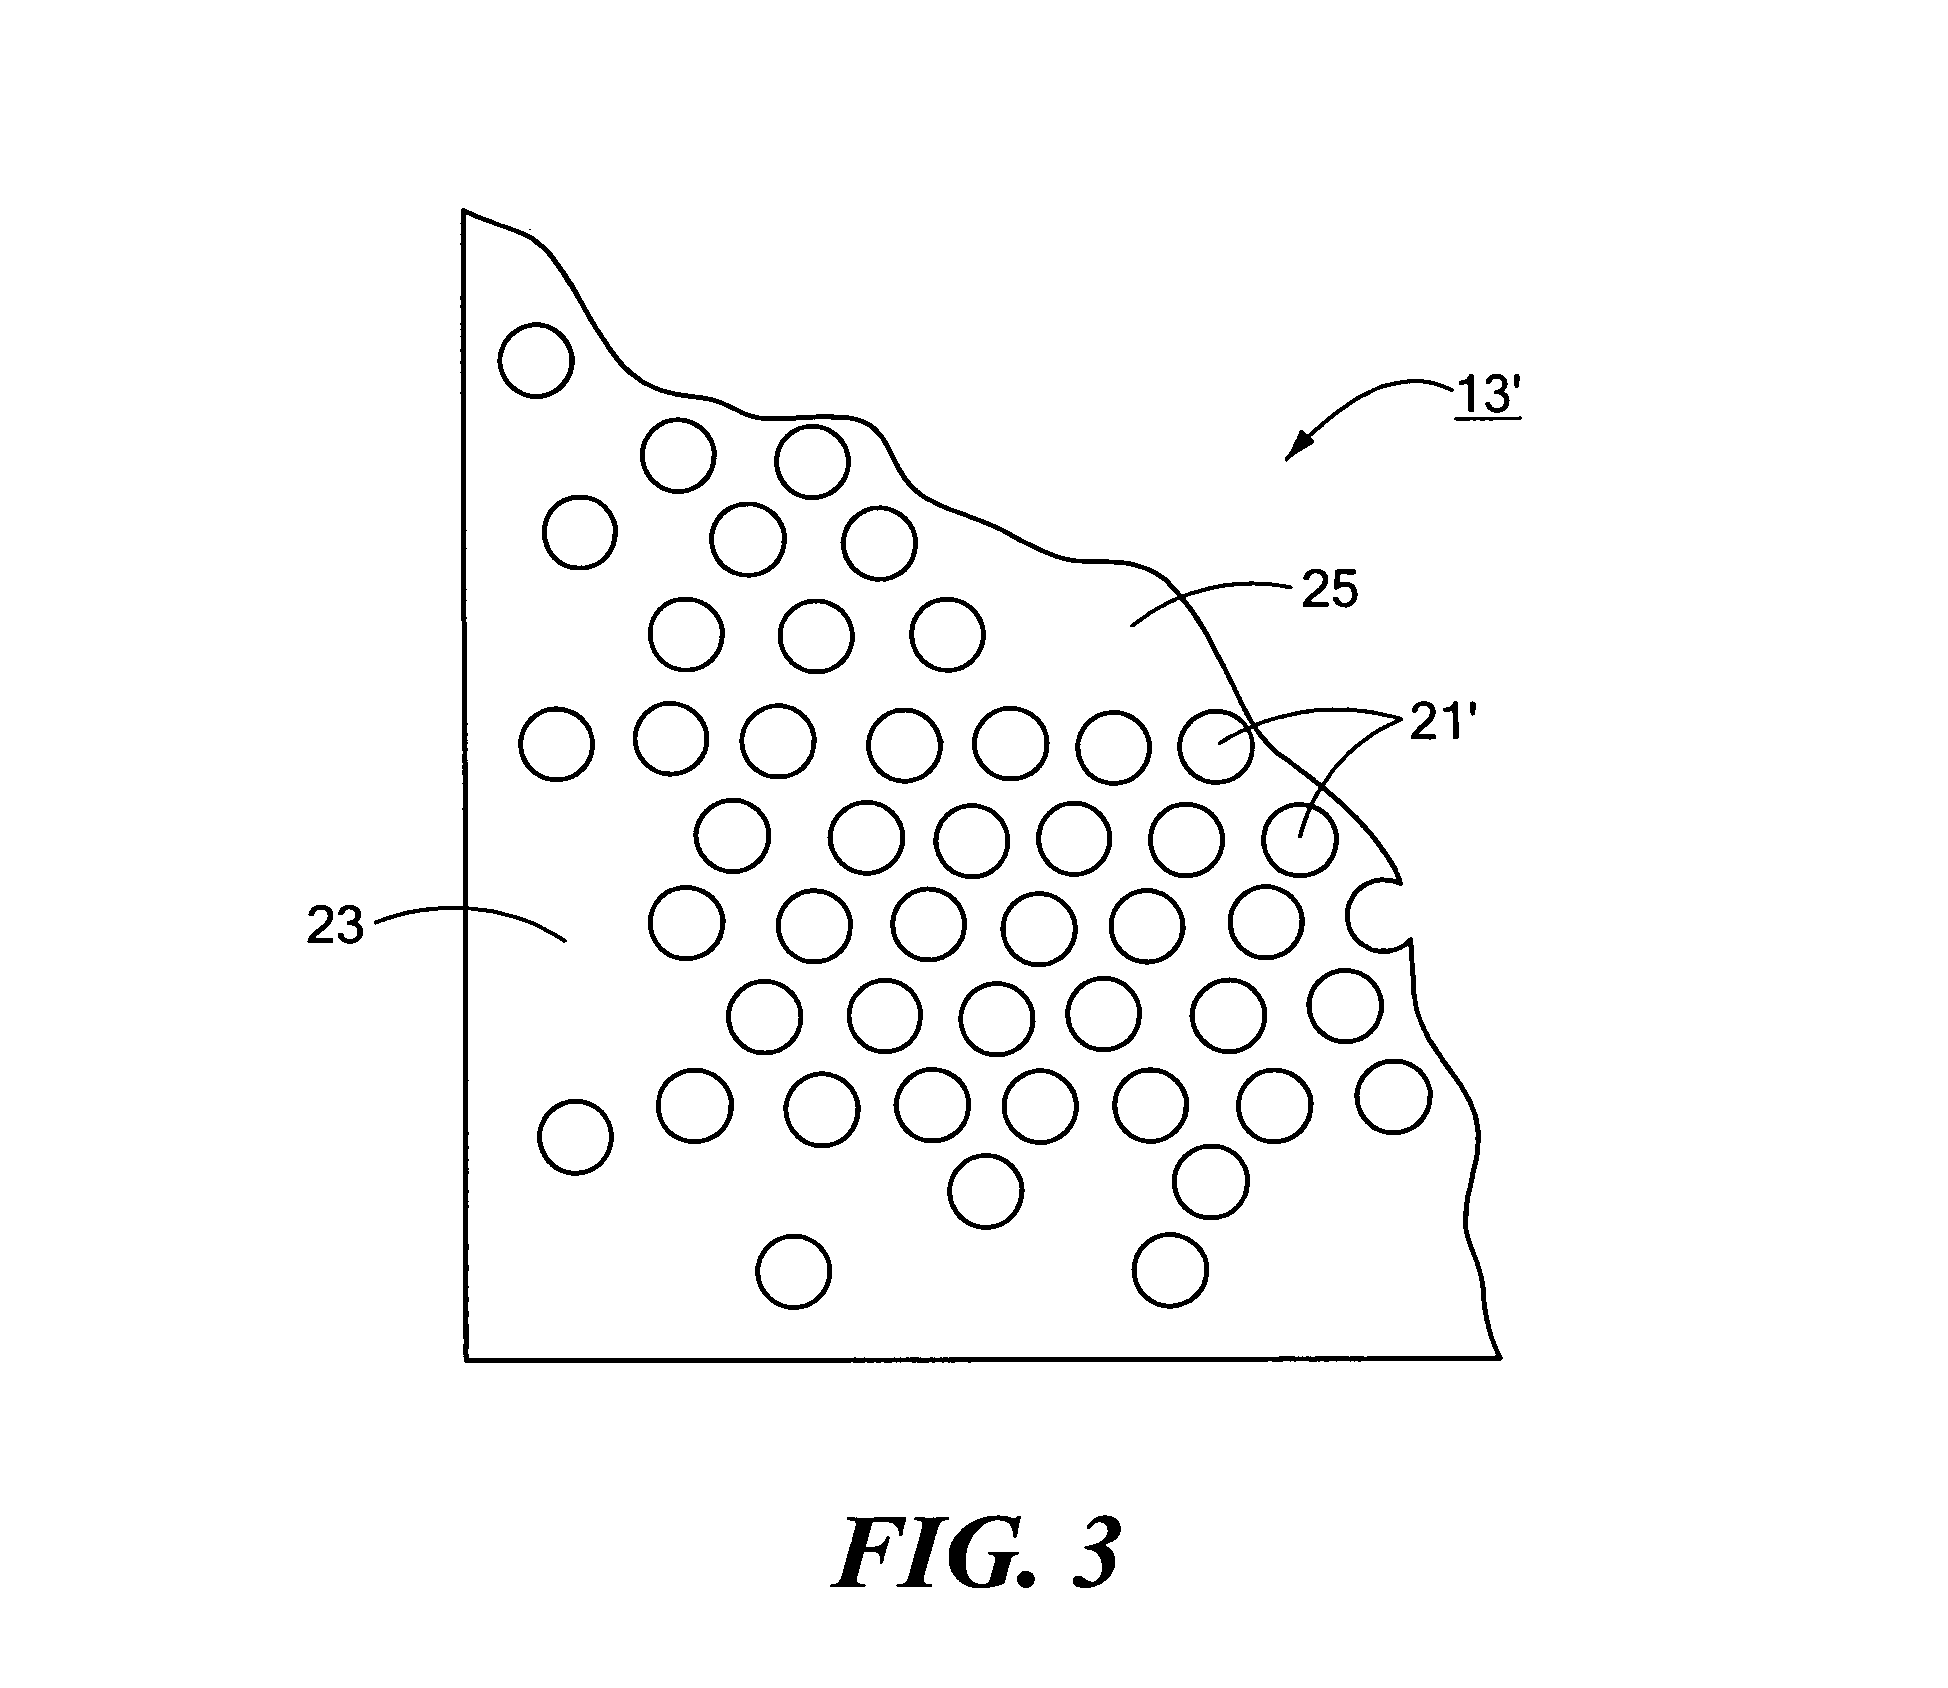 Solid polymer electrolyte composite membrane comprising laser micromachined porous support